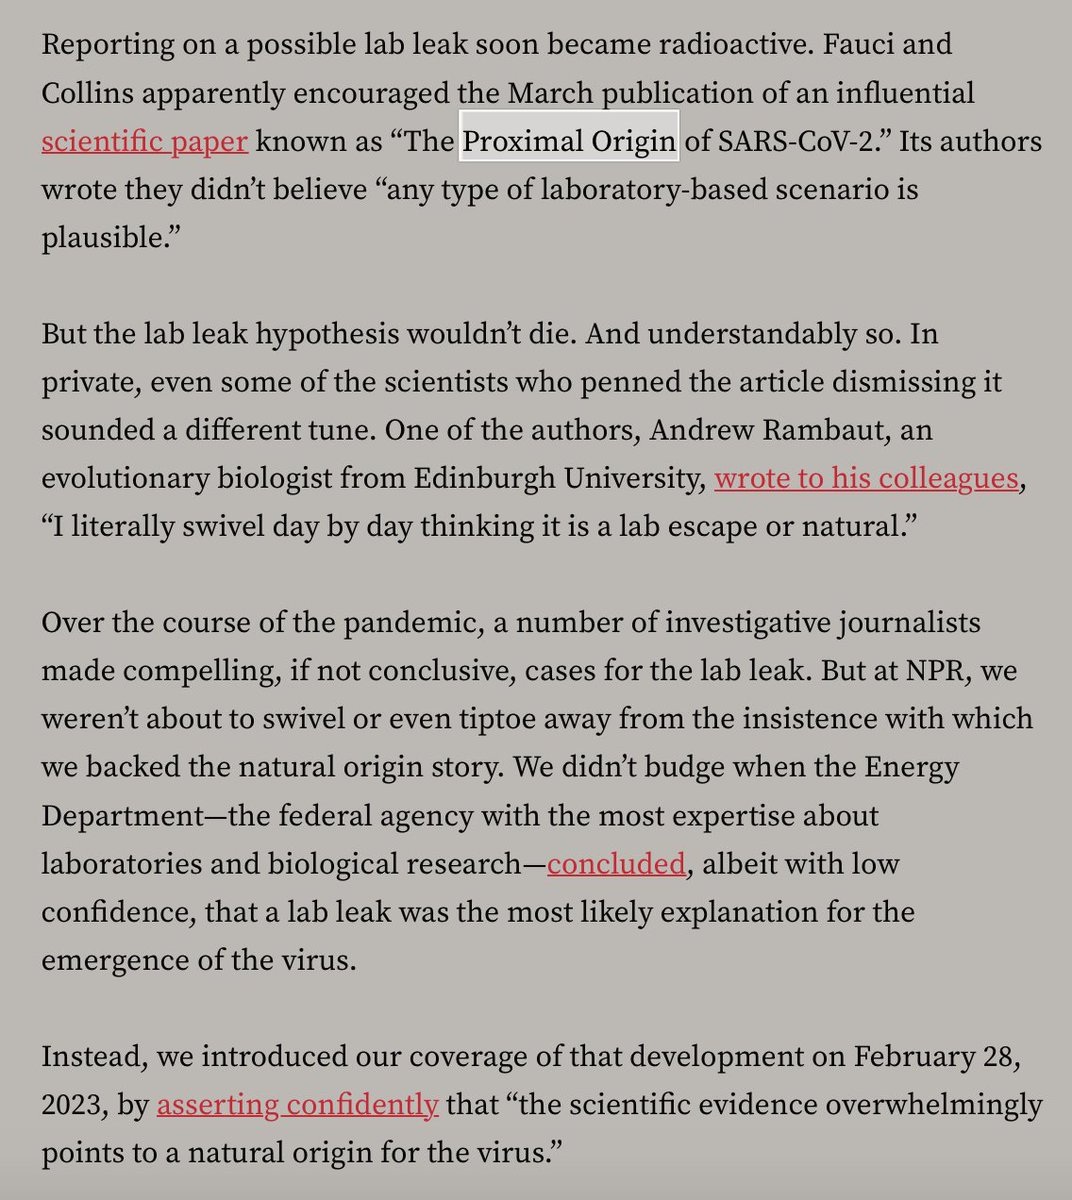 Interesting to see newsrooms being duped by the 'Proximal Origin' paper on COVID origins highlighted here as a major failure in media. Obviously I agree! But the story is deeper than that. Newsrooms are failing to course correct and make amends. But on top of that, some are…